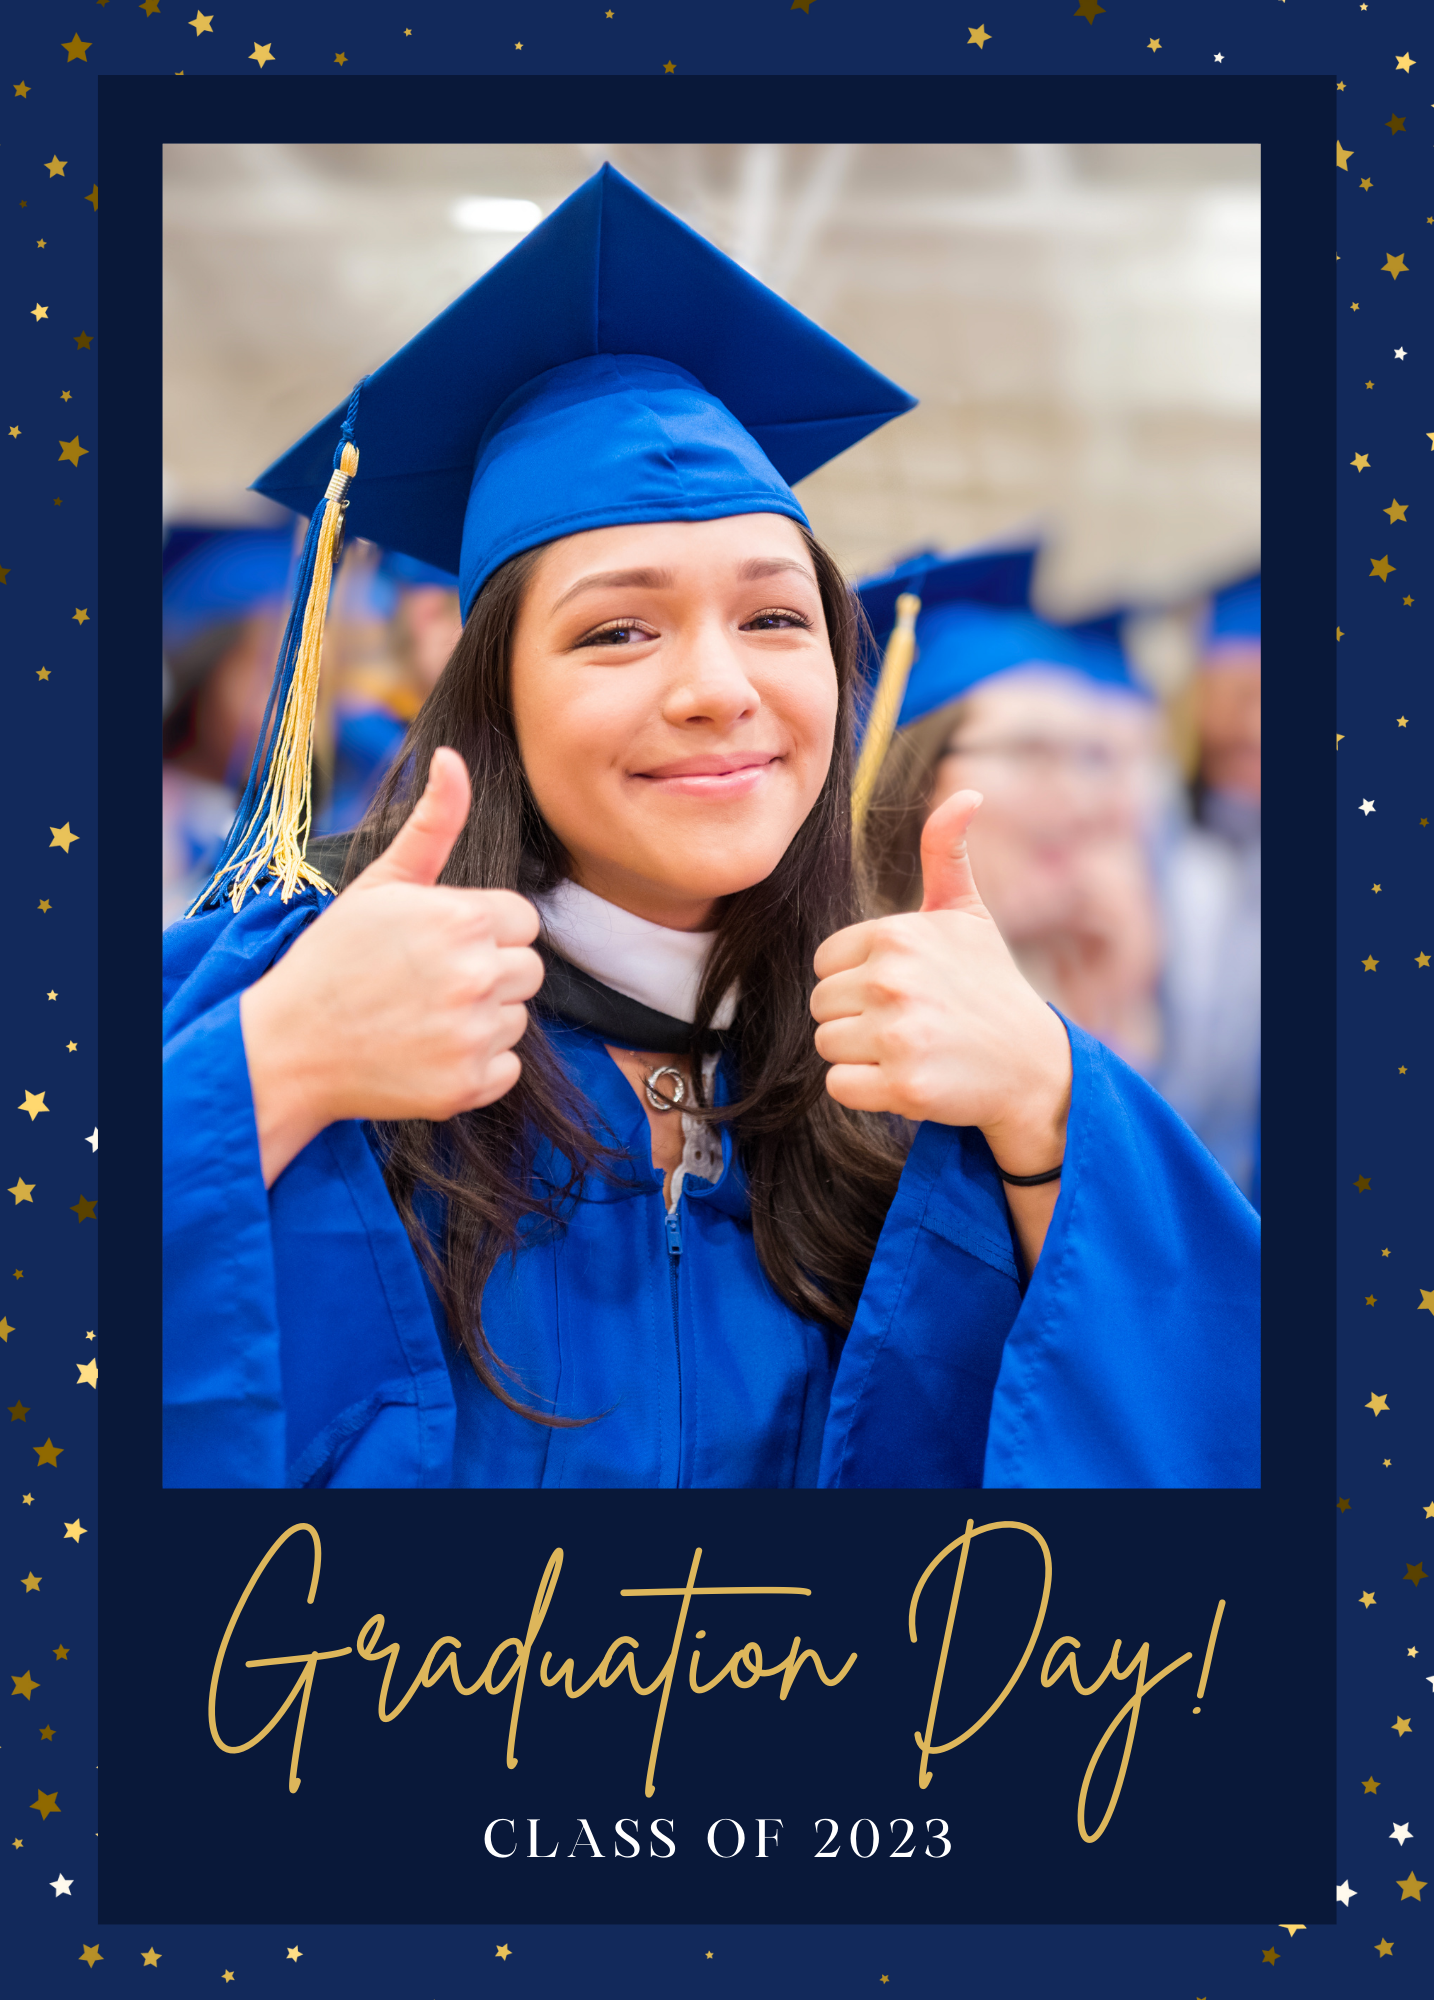 Graduation Day - Graduation Card - Personalized Greeting Card for Someone in Jail or Prison